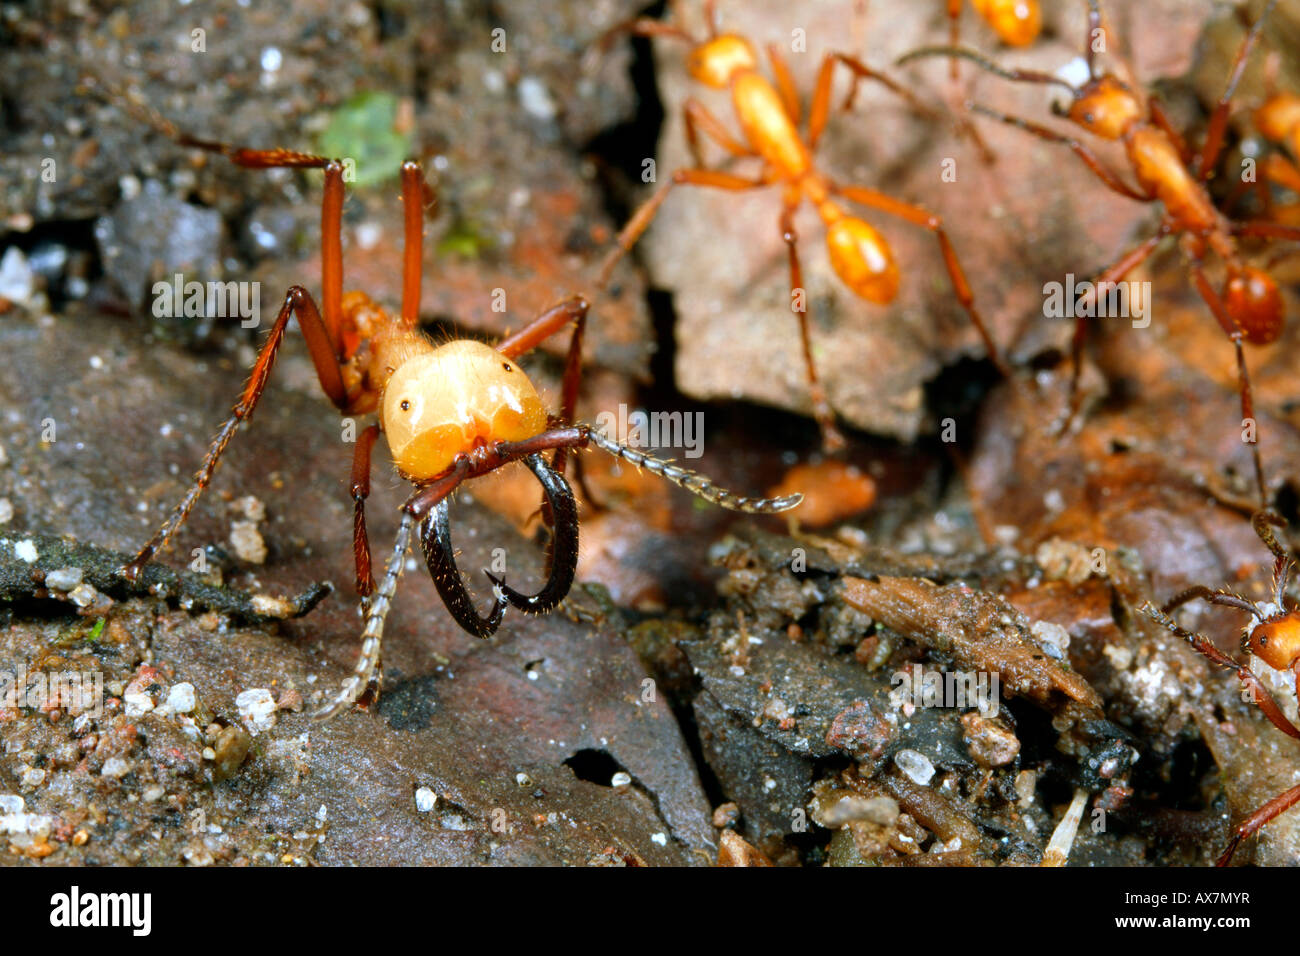 Army ant soldier with big mandibles Stock Photo